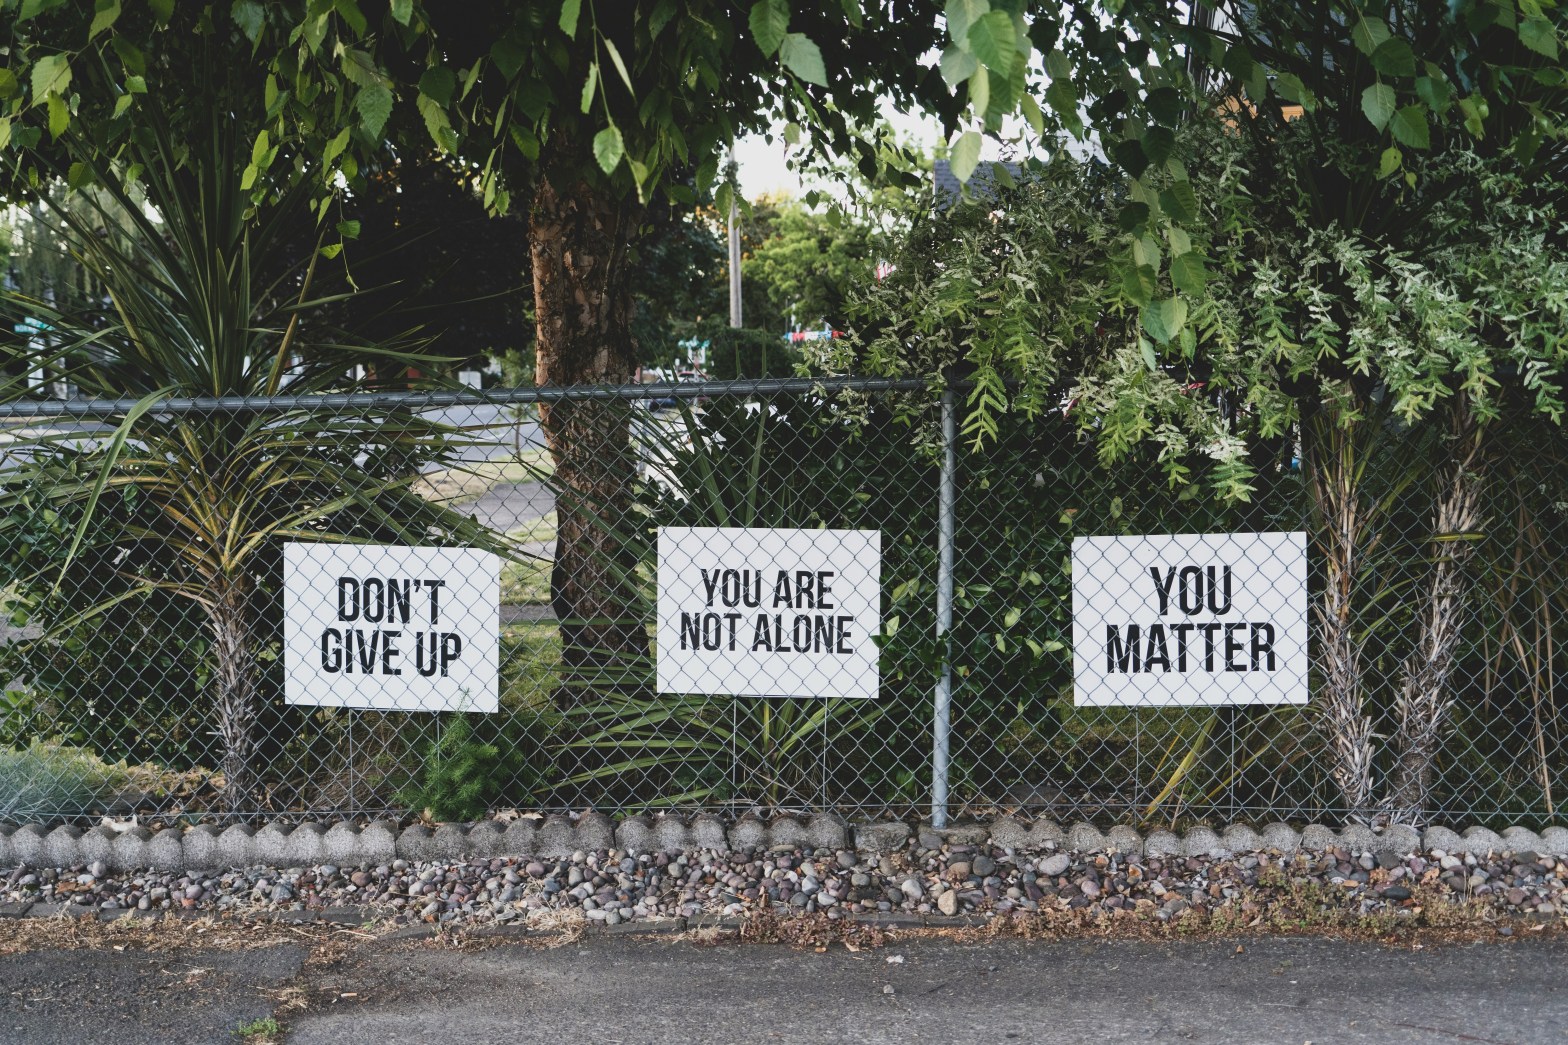 chainlink fence in front of trees with three white signs with black letters, first sign "Don't give up," second sign, "you are not alone," third sign "you matter"